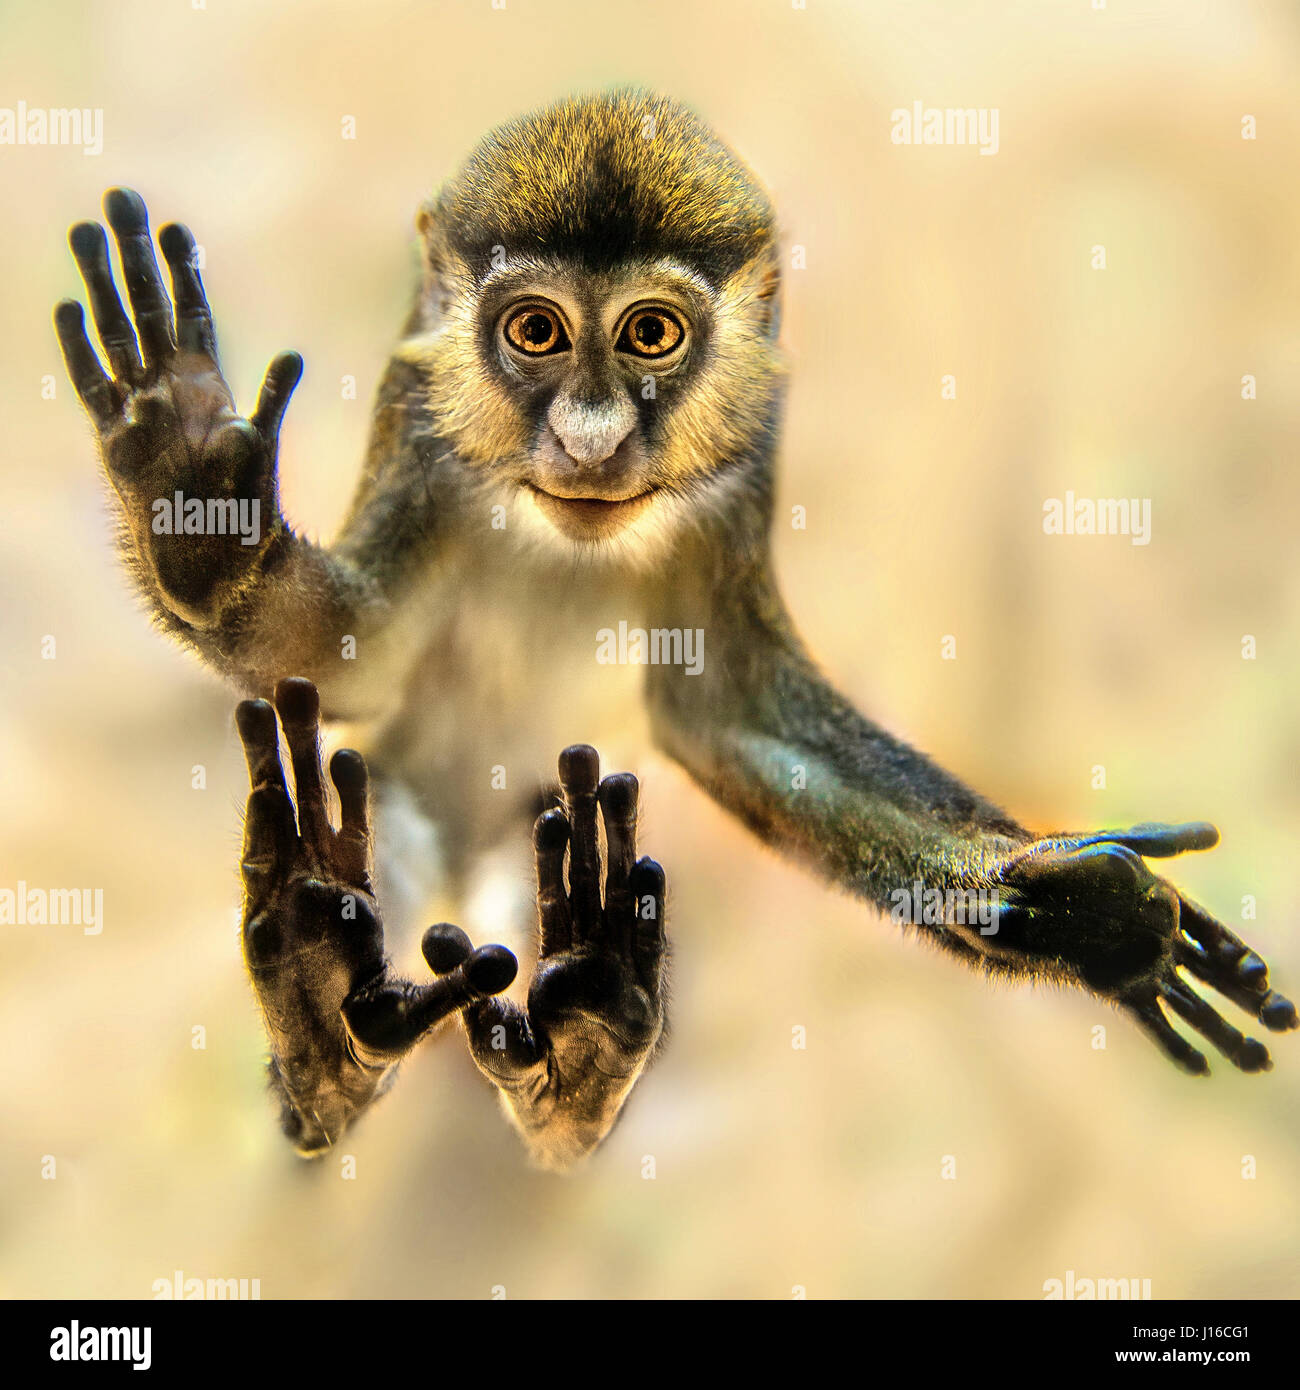 MOSCOW, RUSSIA: A monkey has been snapped getting its kicks from pressing its body against the glass of its enclosure. The curious squirrel monkey wowed visitors outside the Moscow Ocean Park aquarium by leaning it’s back against a tree so it could press it’s hands and feet against the glass to get a good look at its human visitors. The humorous picture was taken by local Moscow resident Svenlana Spirina (28).  COPYRIGHT: Svenlana Spirana / Media Drum World Stock Photo